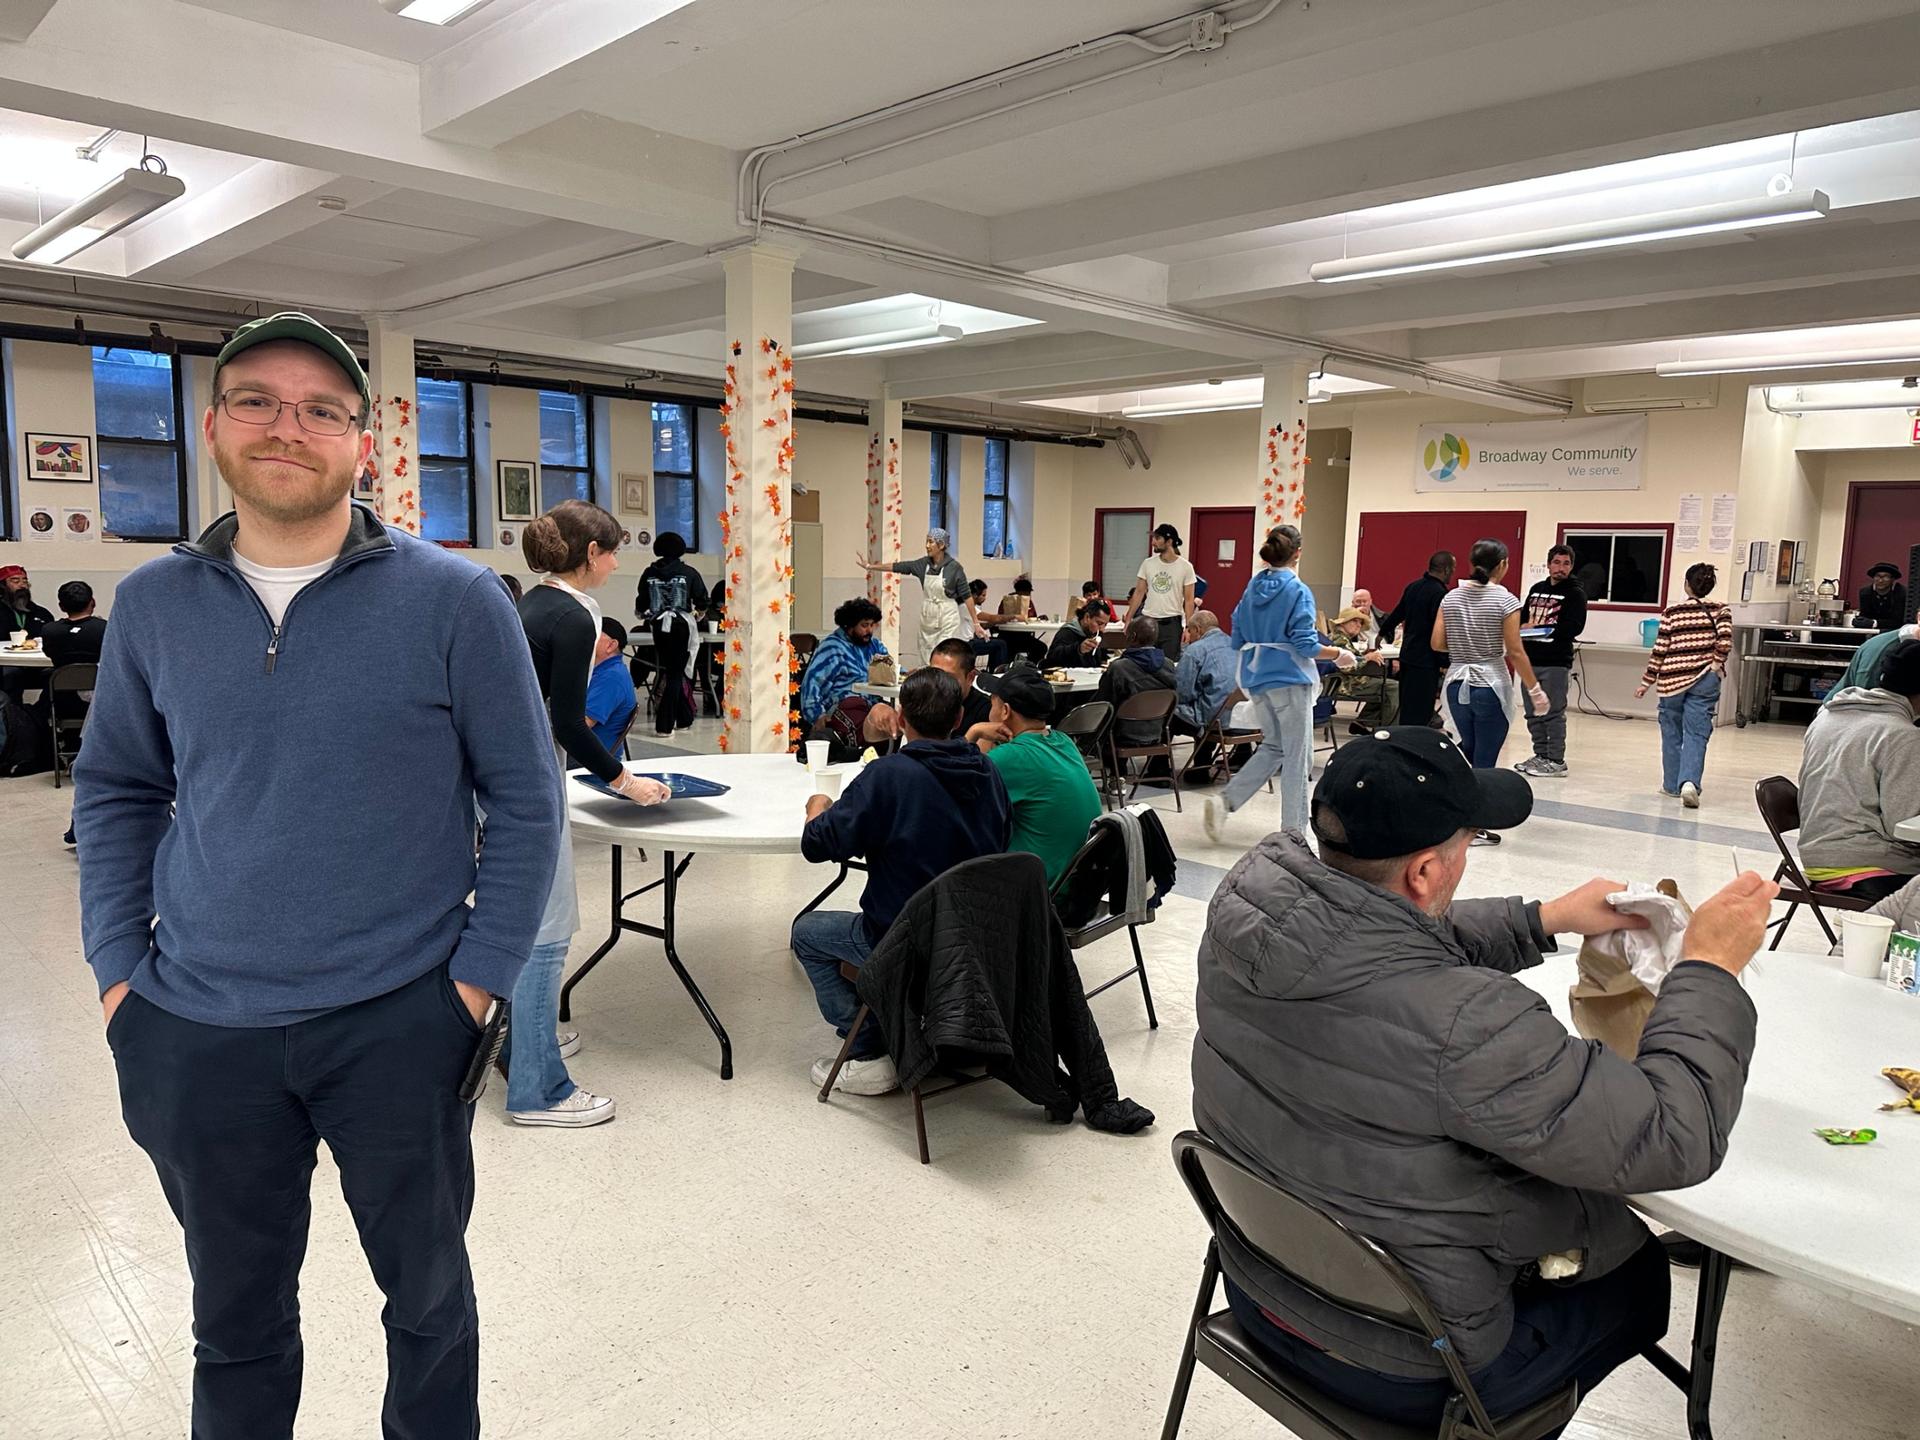 Isaac Adlerstein, the executive director of Broadway Community, a non-profit that runs the shelter and soup kitchen at Broadway Presbyterian, says that he is disappointed that the city program is behind schedule.